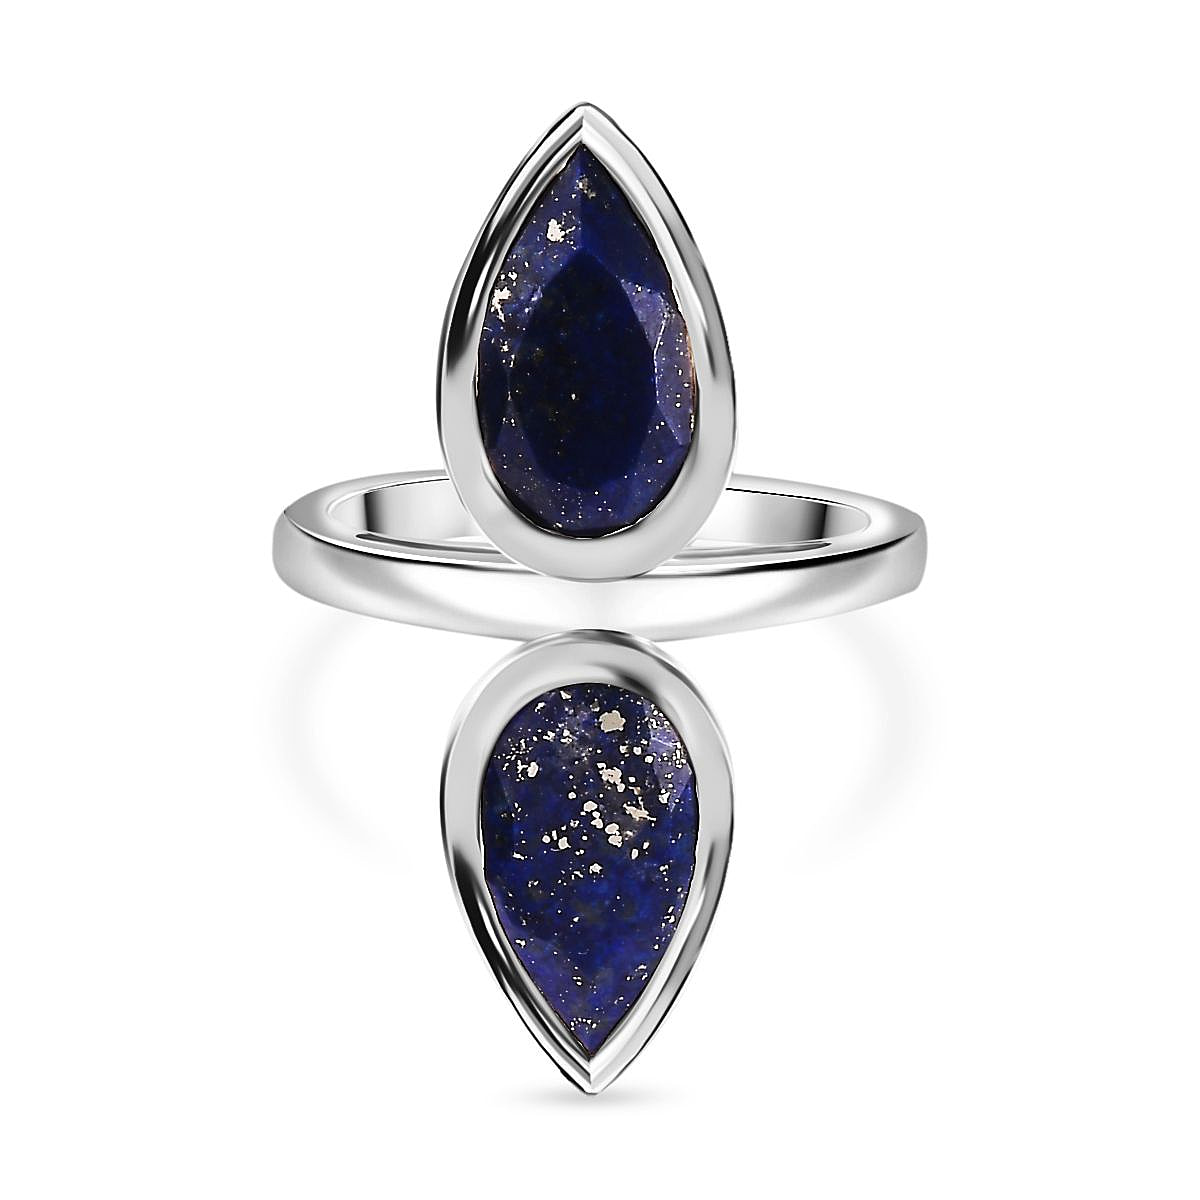 Lapis Lazuli Drop Ring in Platinum Overlay Sterling Silver 5.10 Ct, Silver Wt. 5.75 Gms